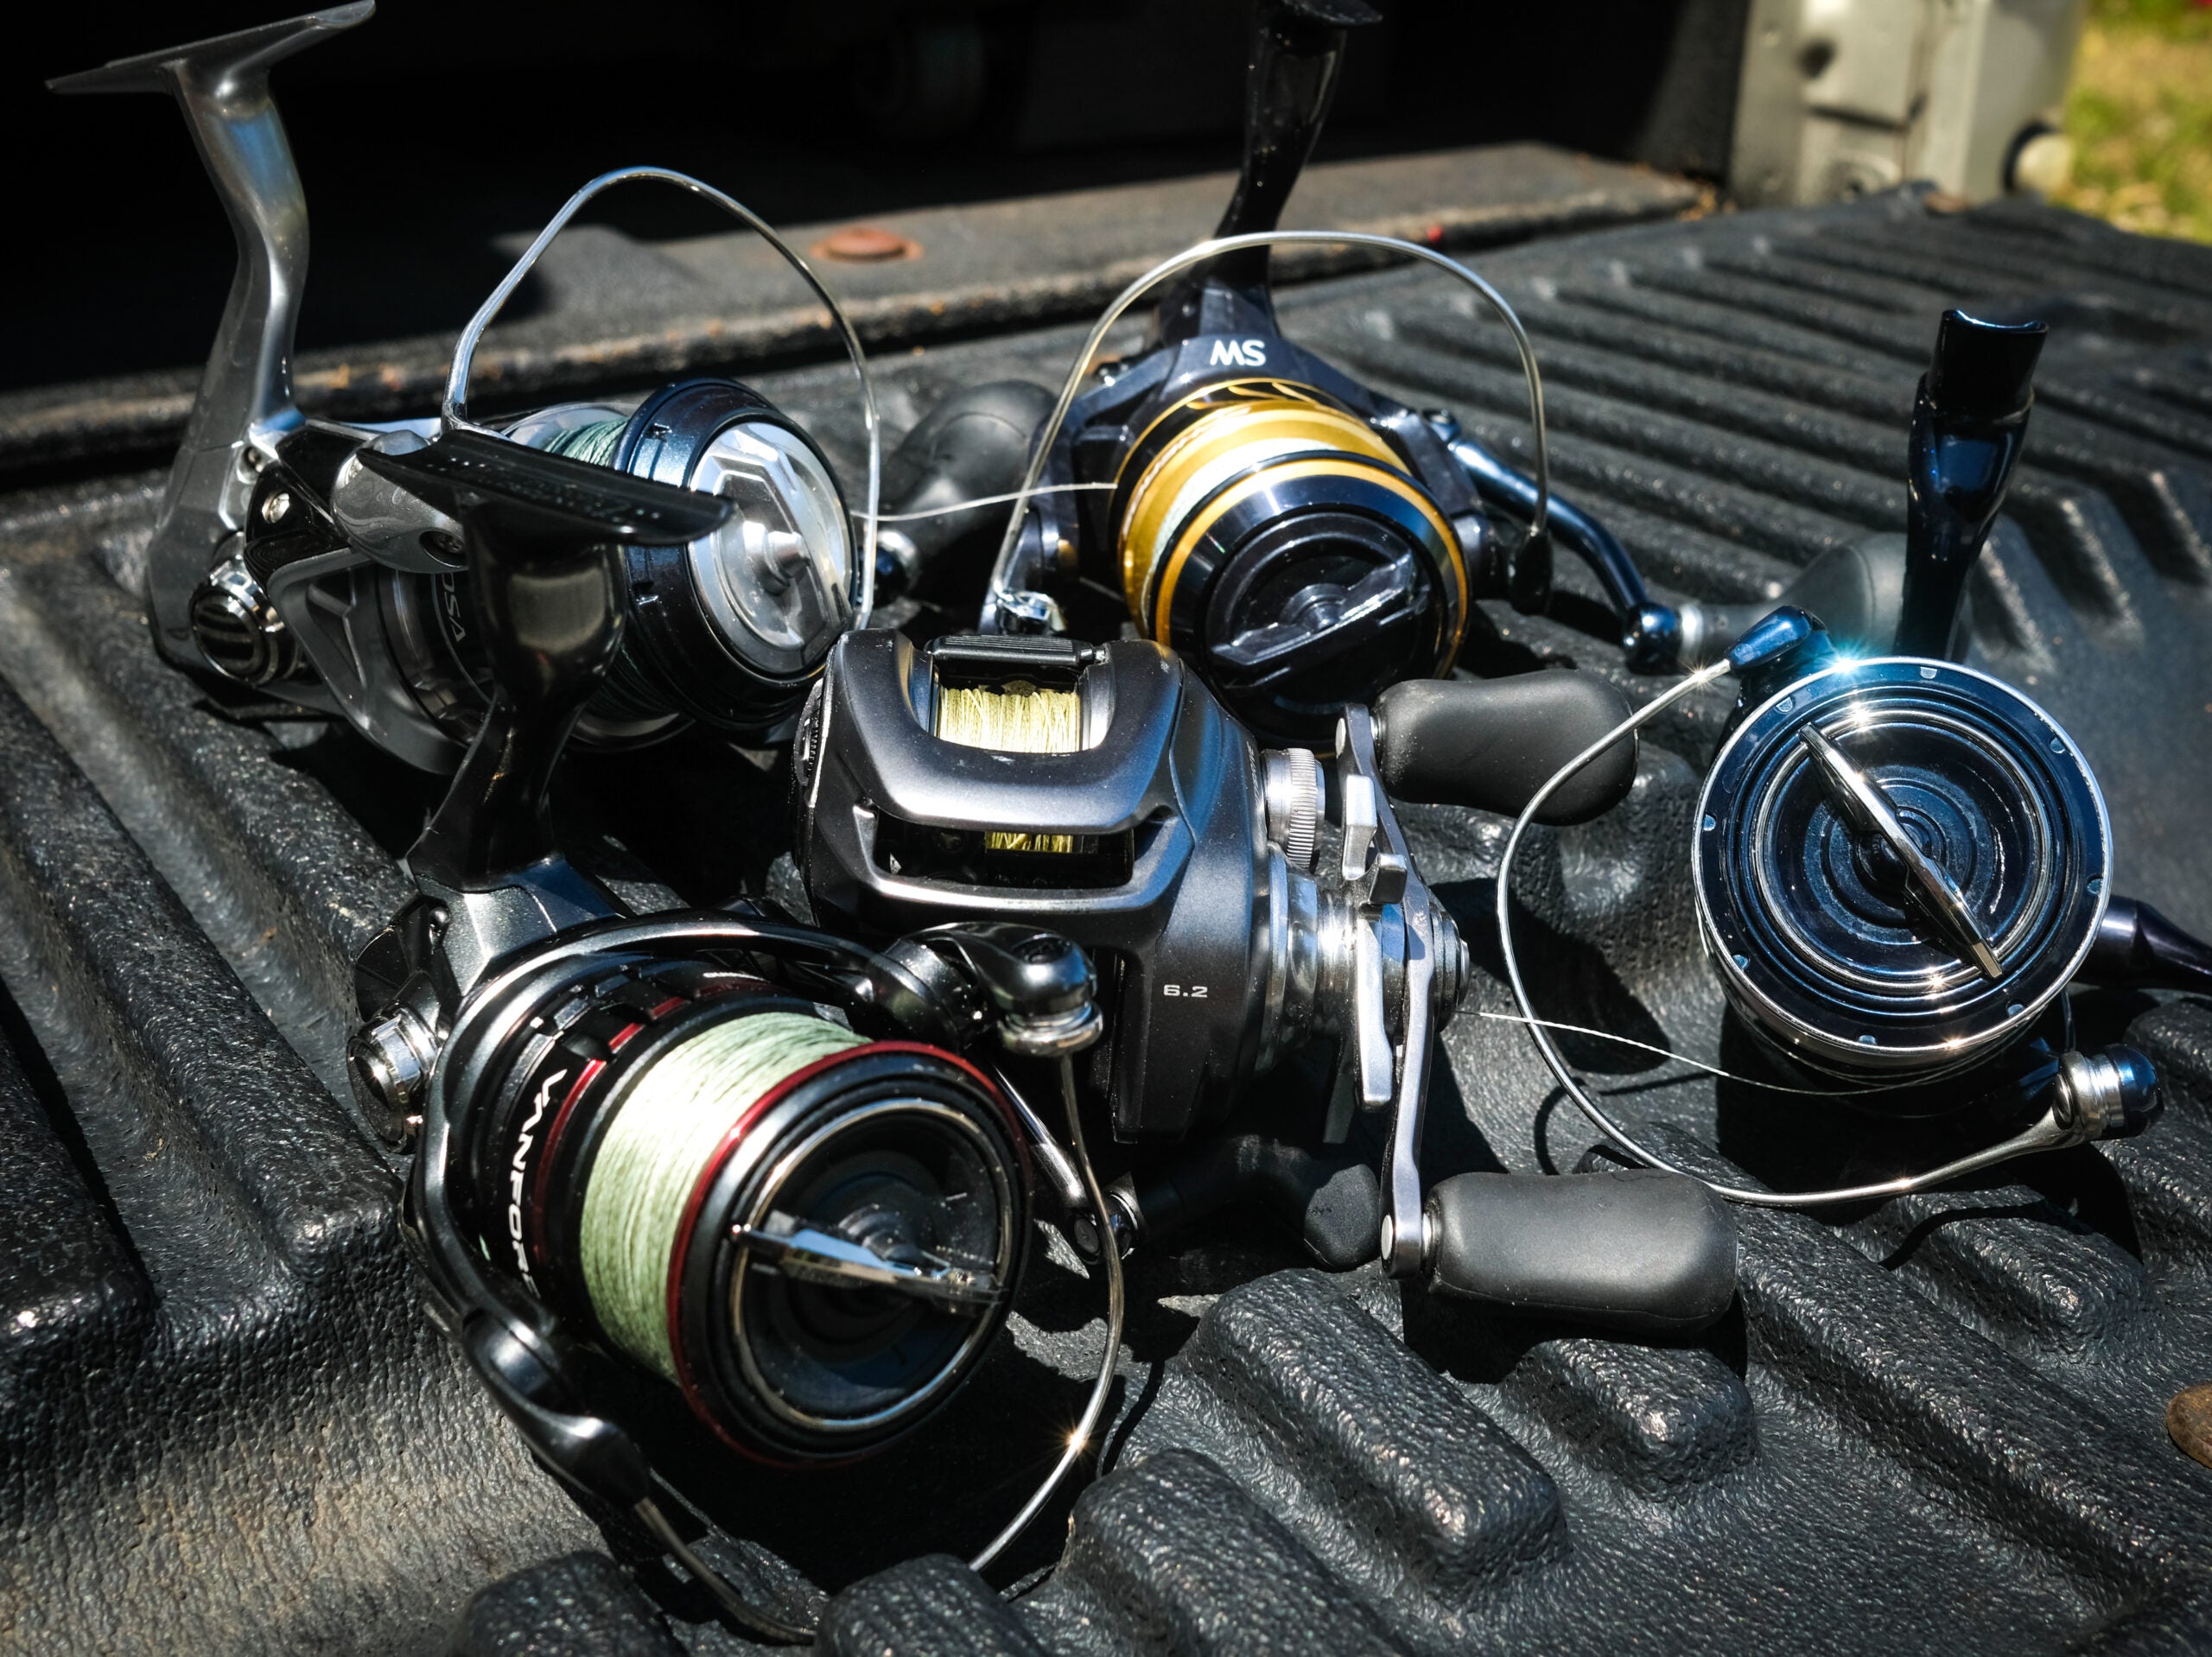 Does Shimano make the best fishing reels? - Quora